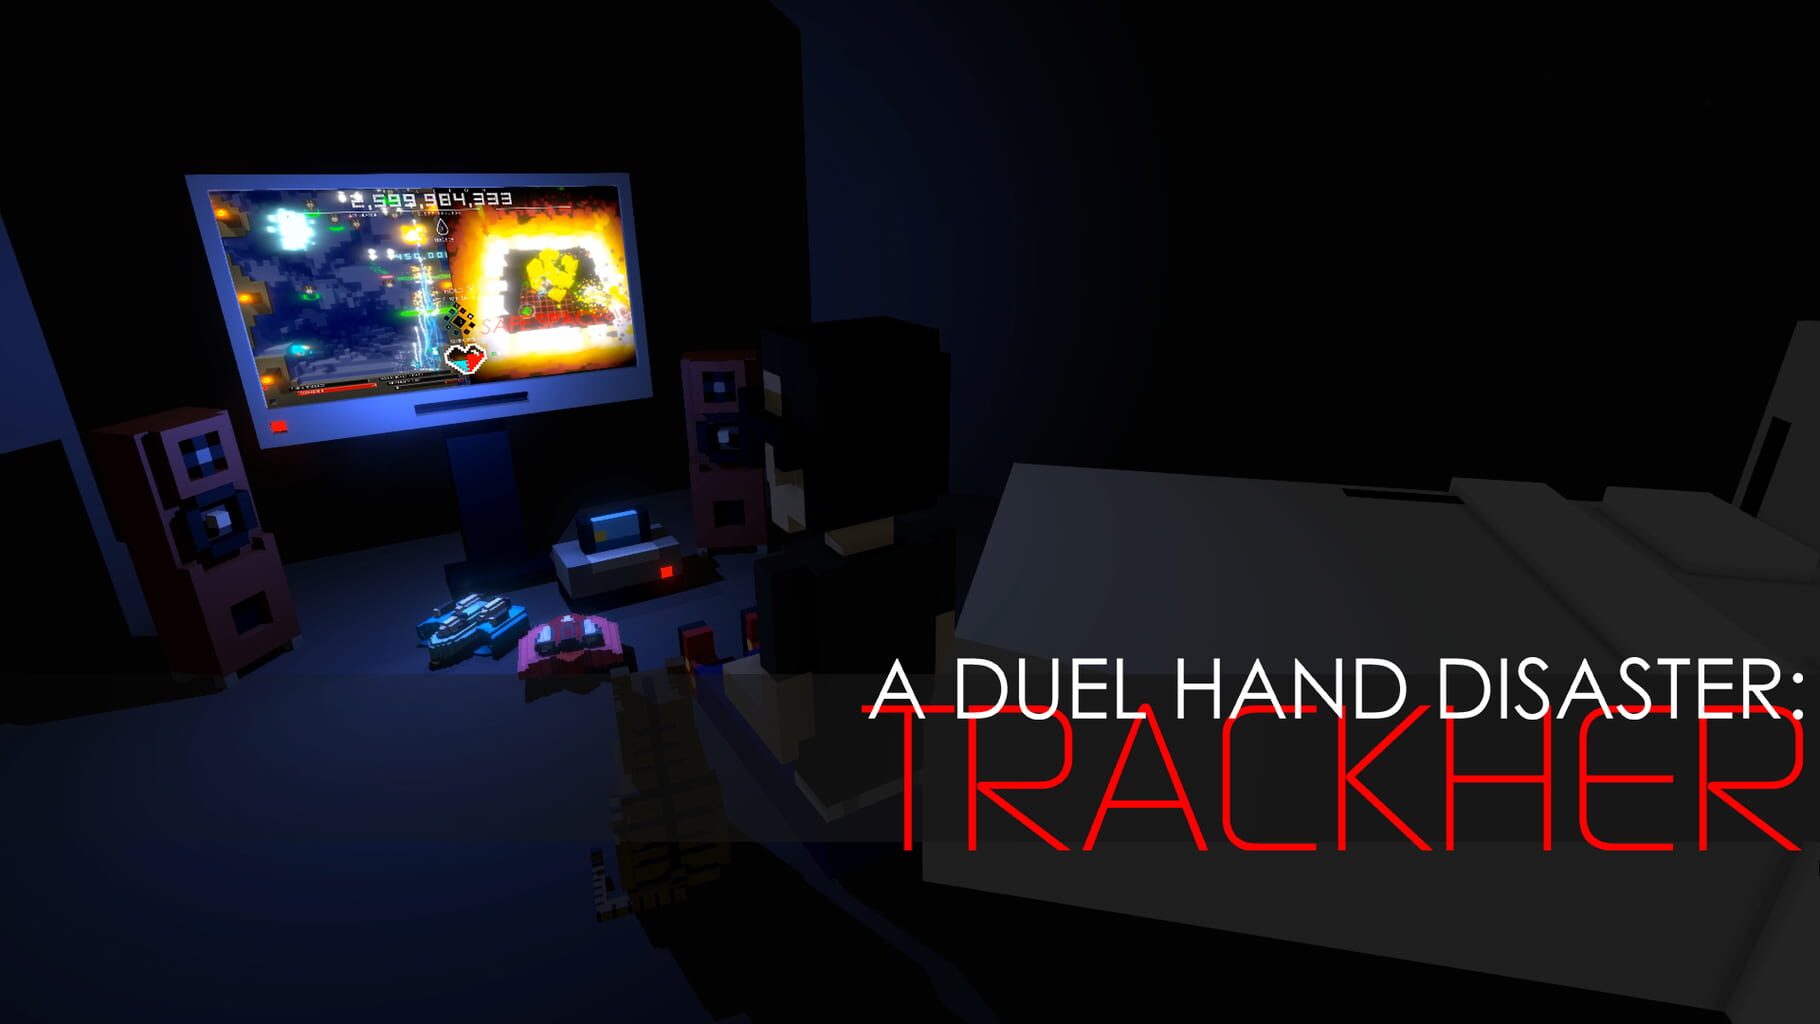 A Duel Hand Disaster: Trackher artwork